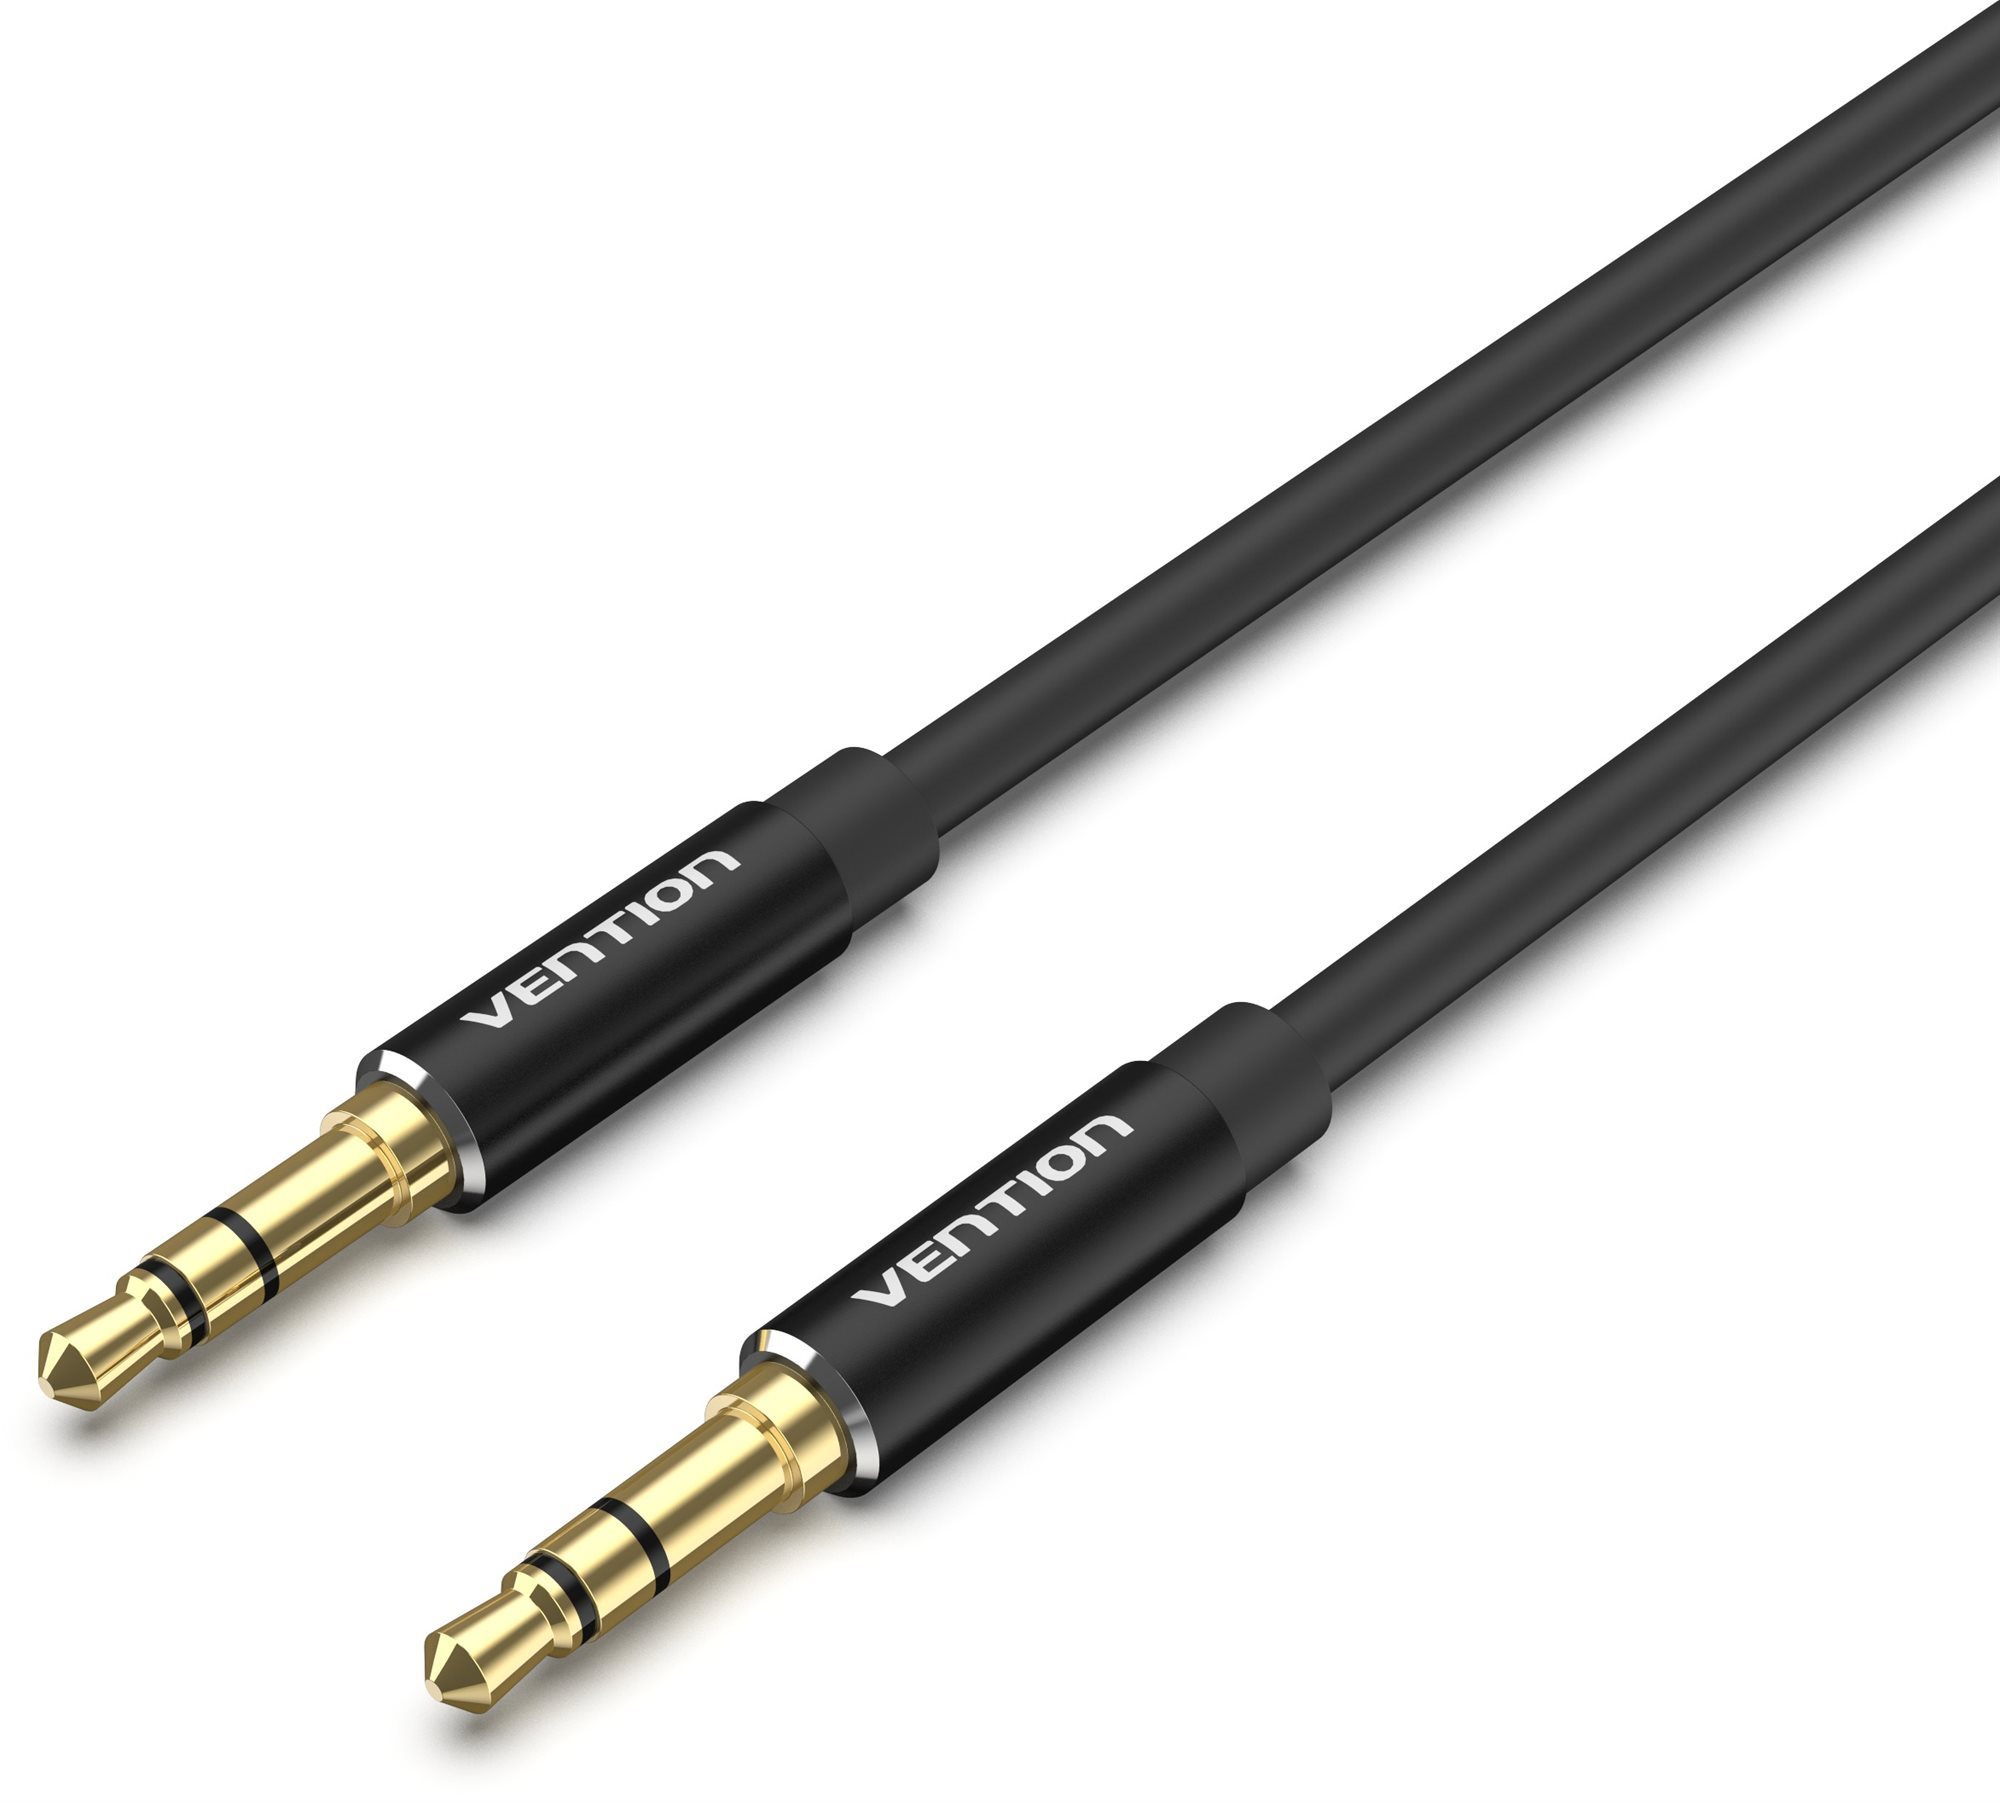 Vention 3,5 mm Male to Male Audio Cable 2 m Black Aluminum Alloy Type